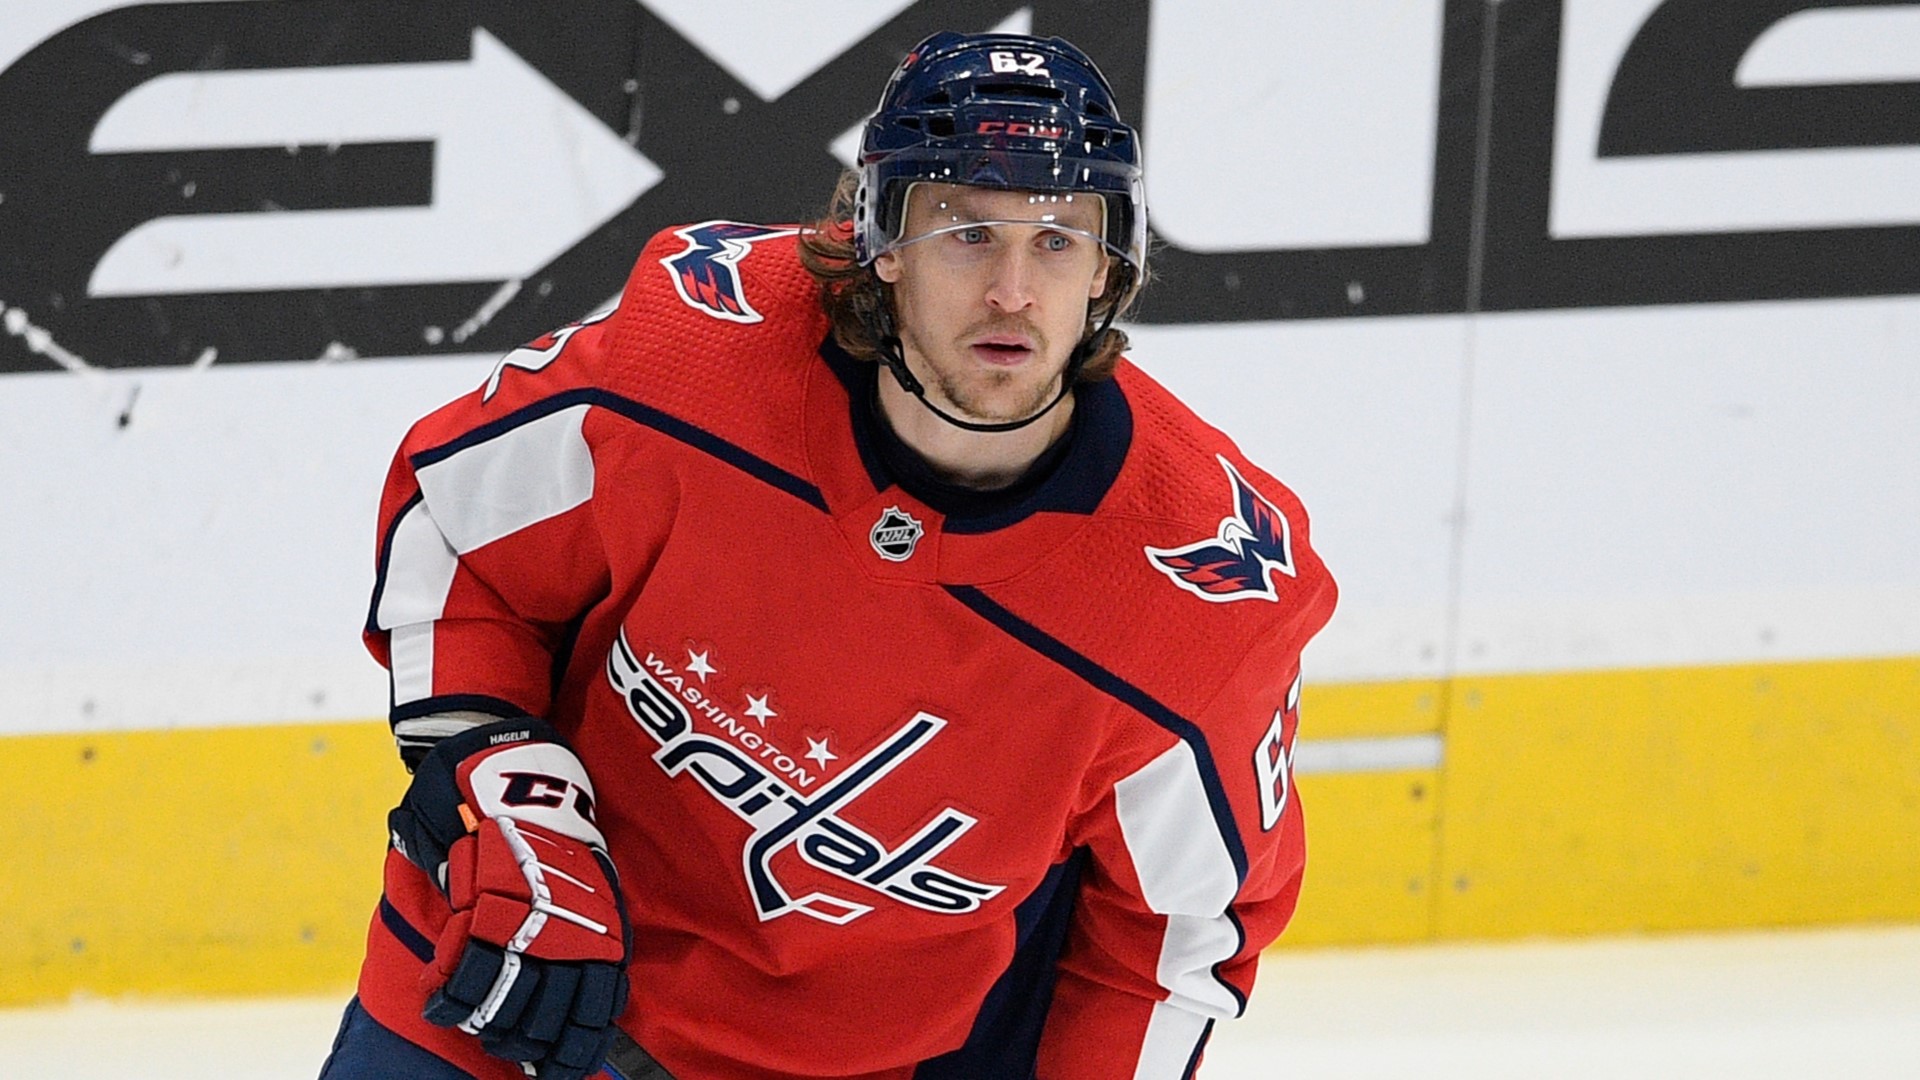 Hagelin knows a thing or two about playoff hockey and believes momentum can make or break a team.